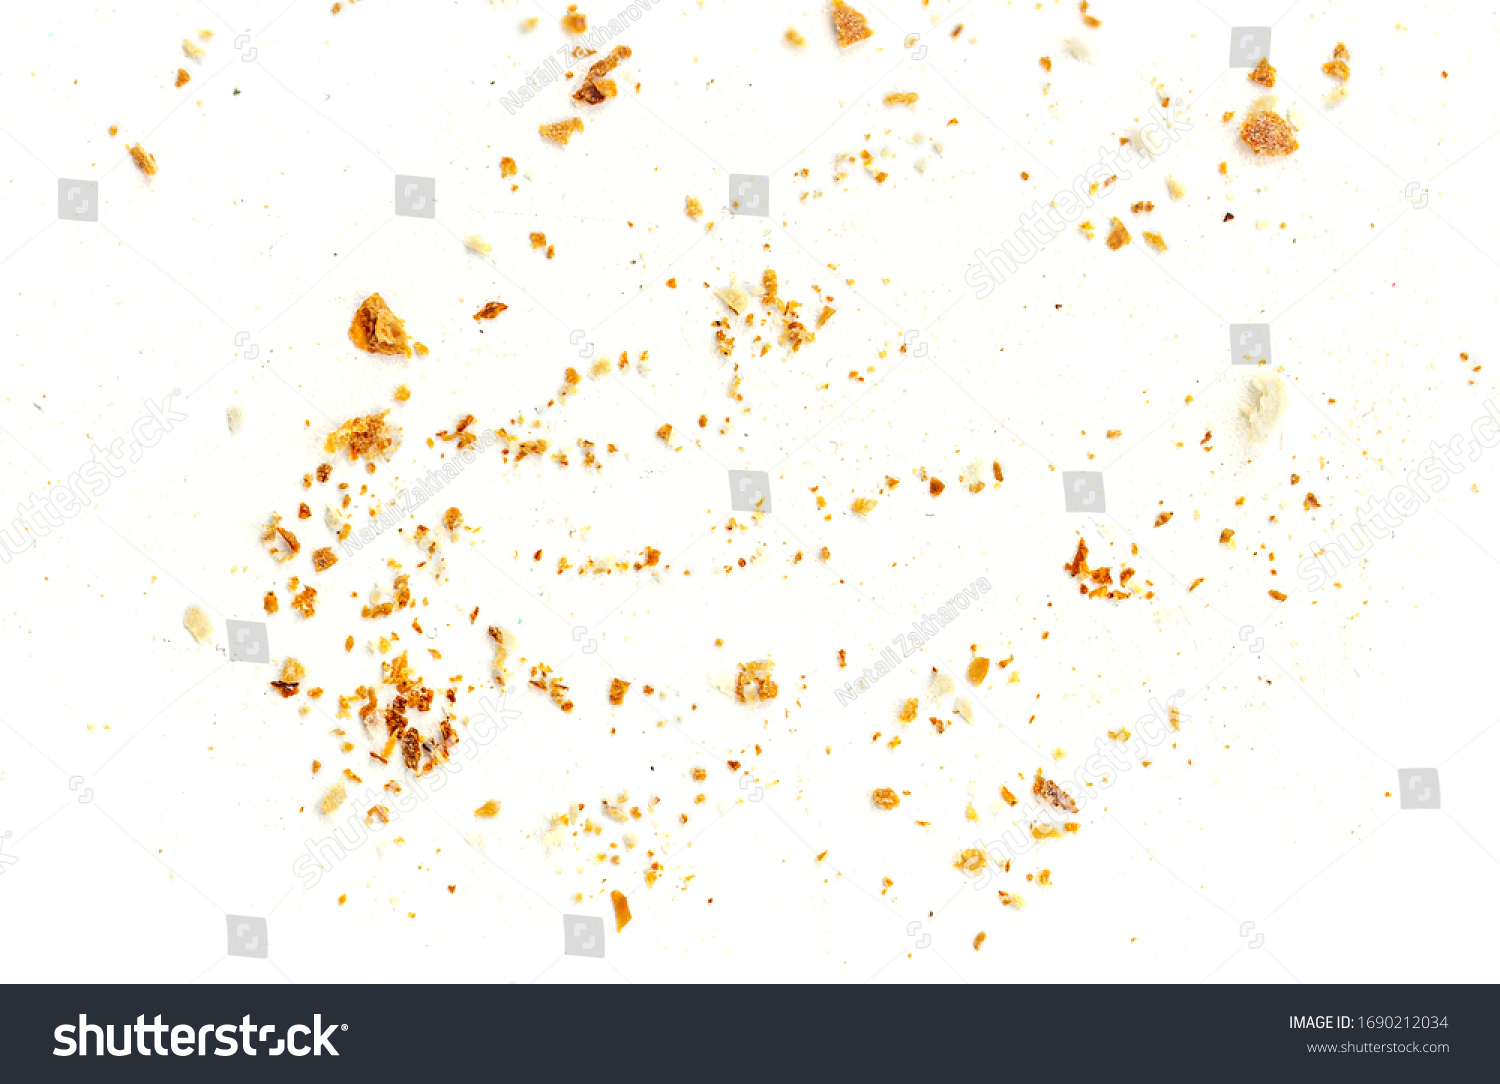 Bread crumbs isolated on white background.  Top view
 #1690212034